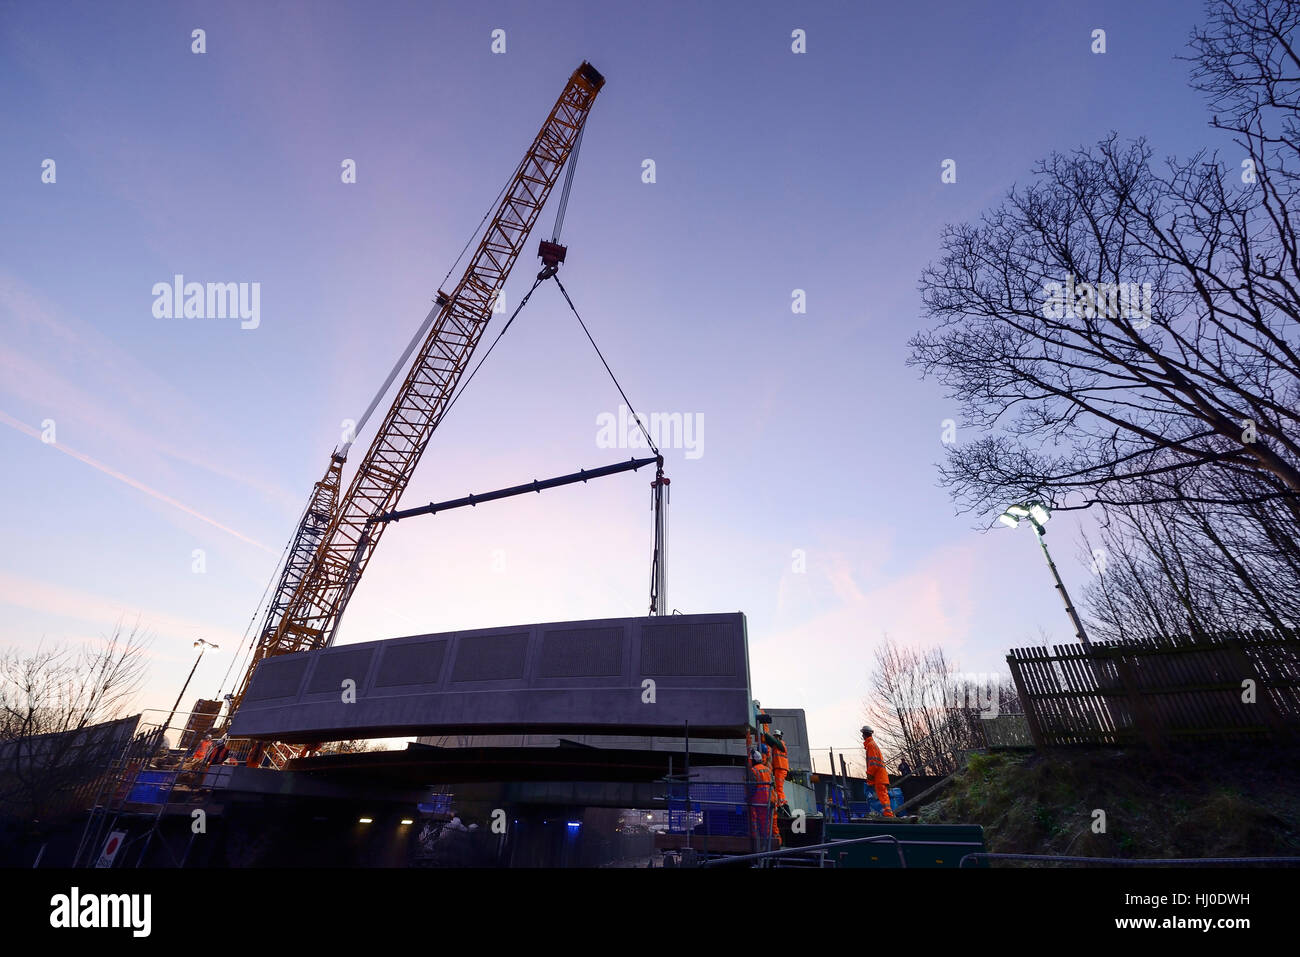 Chester, UK. 21st January 2017. Installation of a concrete road bridge at first light on Brook Lane over the Merseyrail Wirral Line in Chester, UK ©Andrew Paterson / Alamy Live News Stock Photo